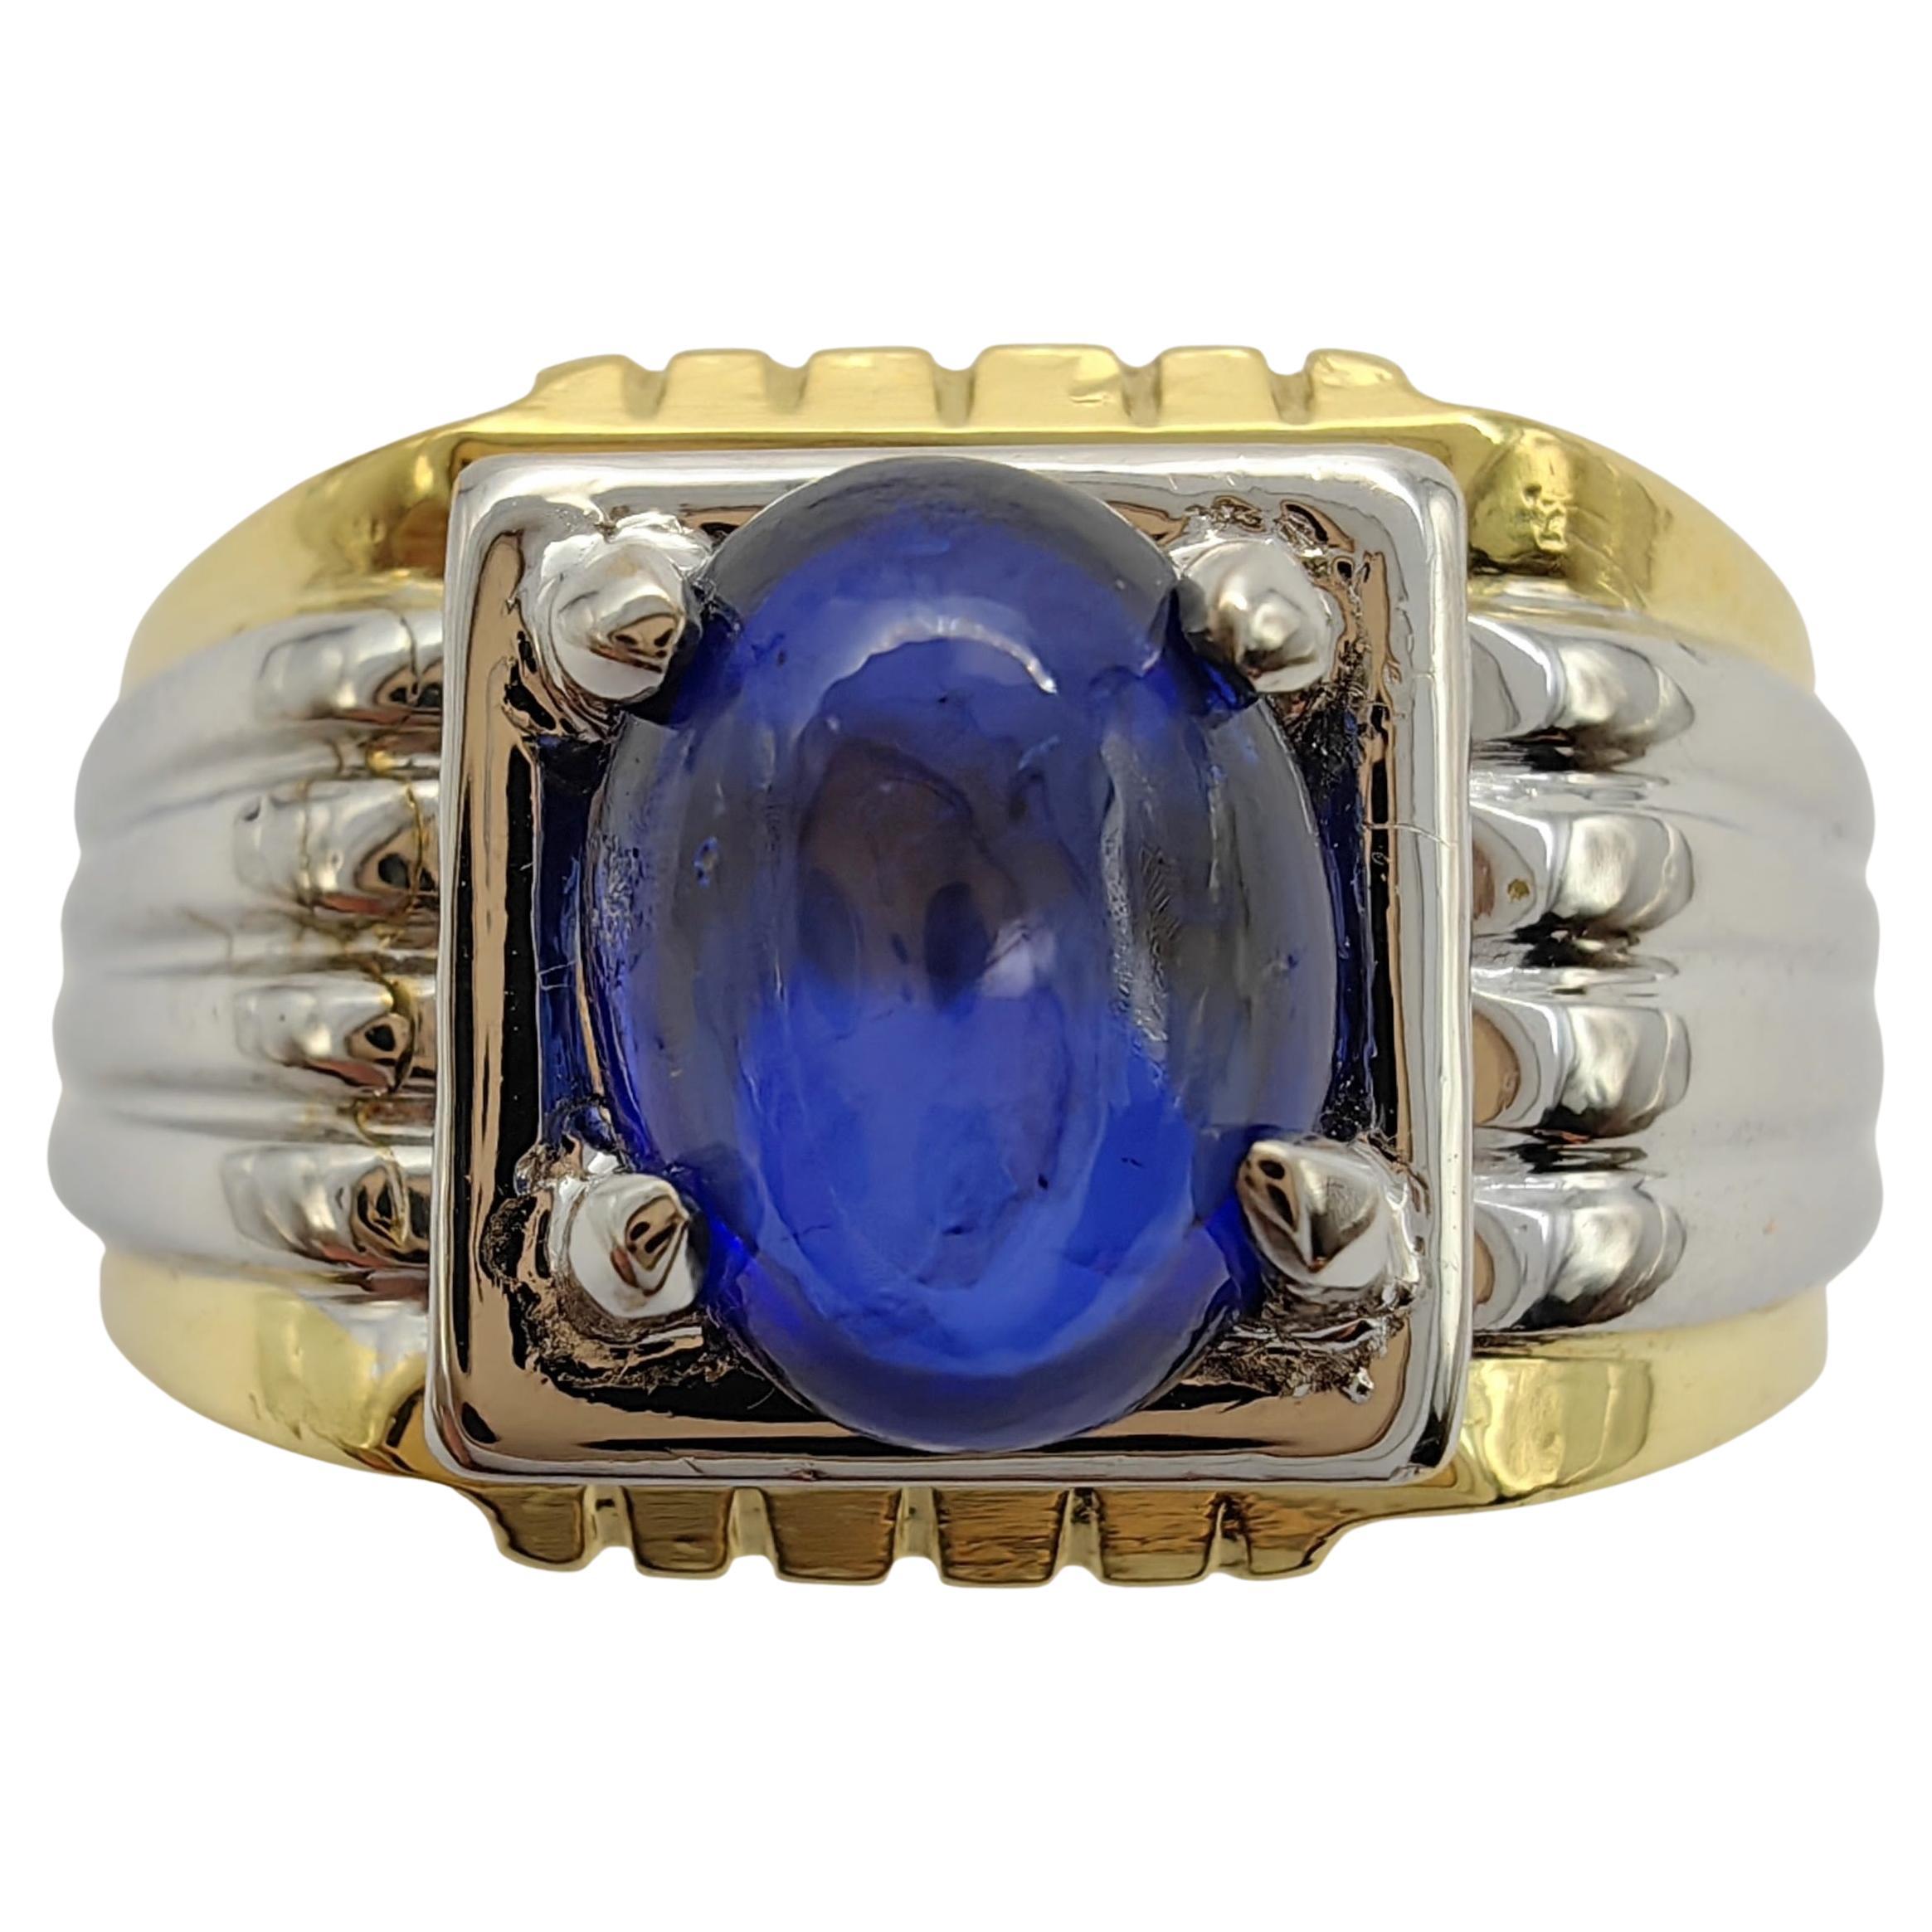 Vintage 80's 1.66 Carat Cabochon Blue Sapphire Two-Tone Men's Ring in 18K Gold For Sale